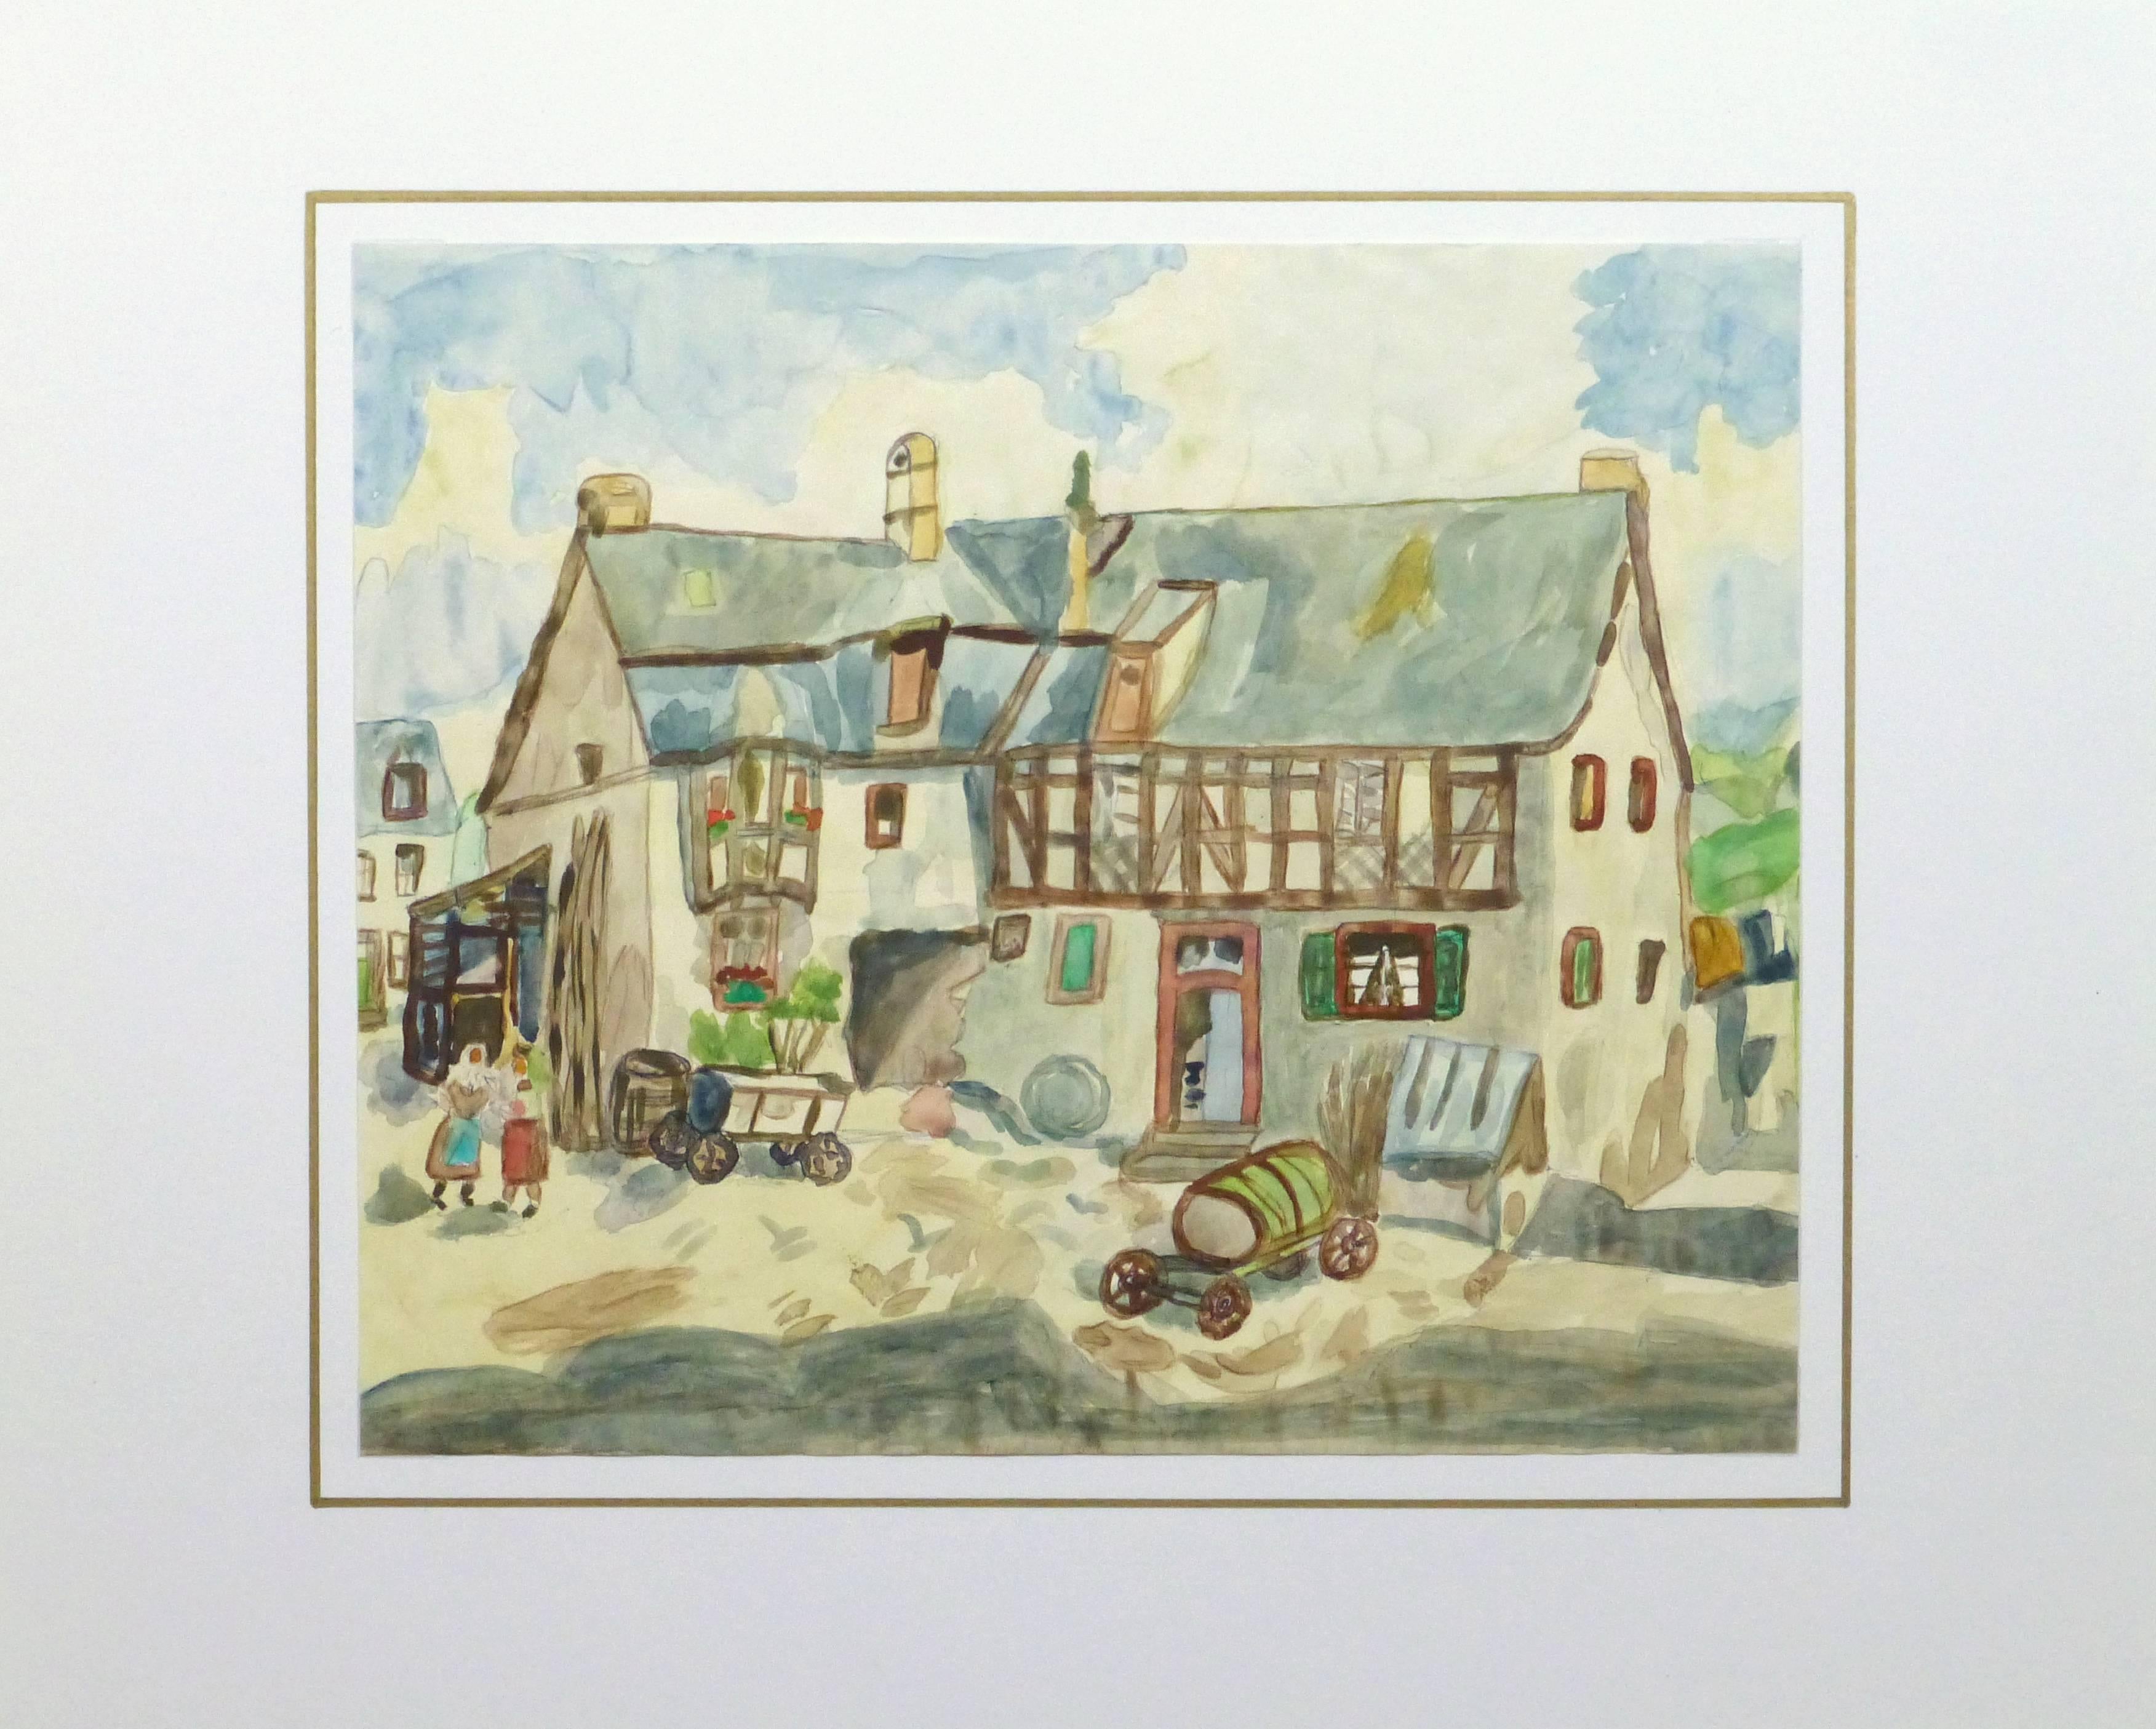 Charming and quaint watercolor of a sweet tudor style farmhouse by artist Schmidt-Brunnenreuth, circa 1930.

Original artwork on paper displayed on a white mat with a gold border. Mat fits a standard-size frame. Archival plastic sleeve and